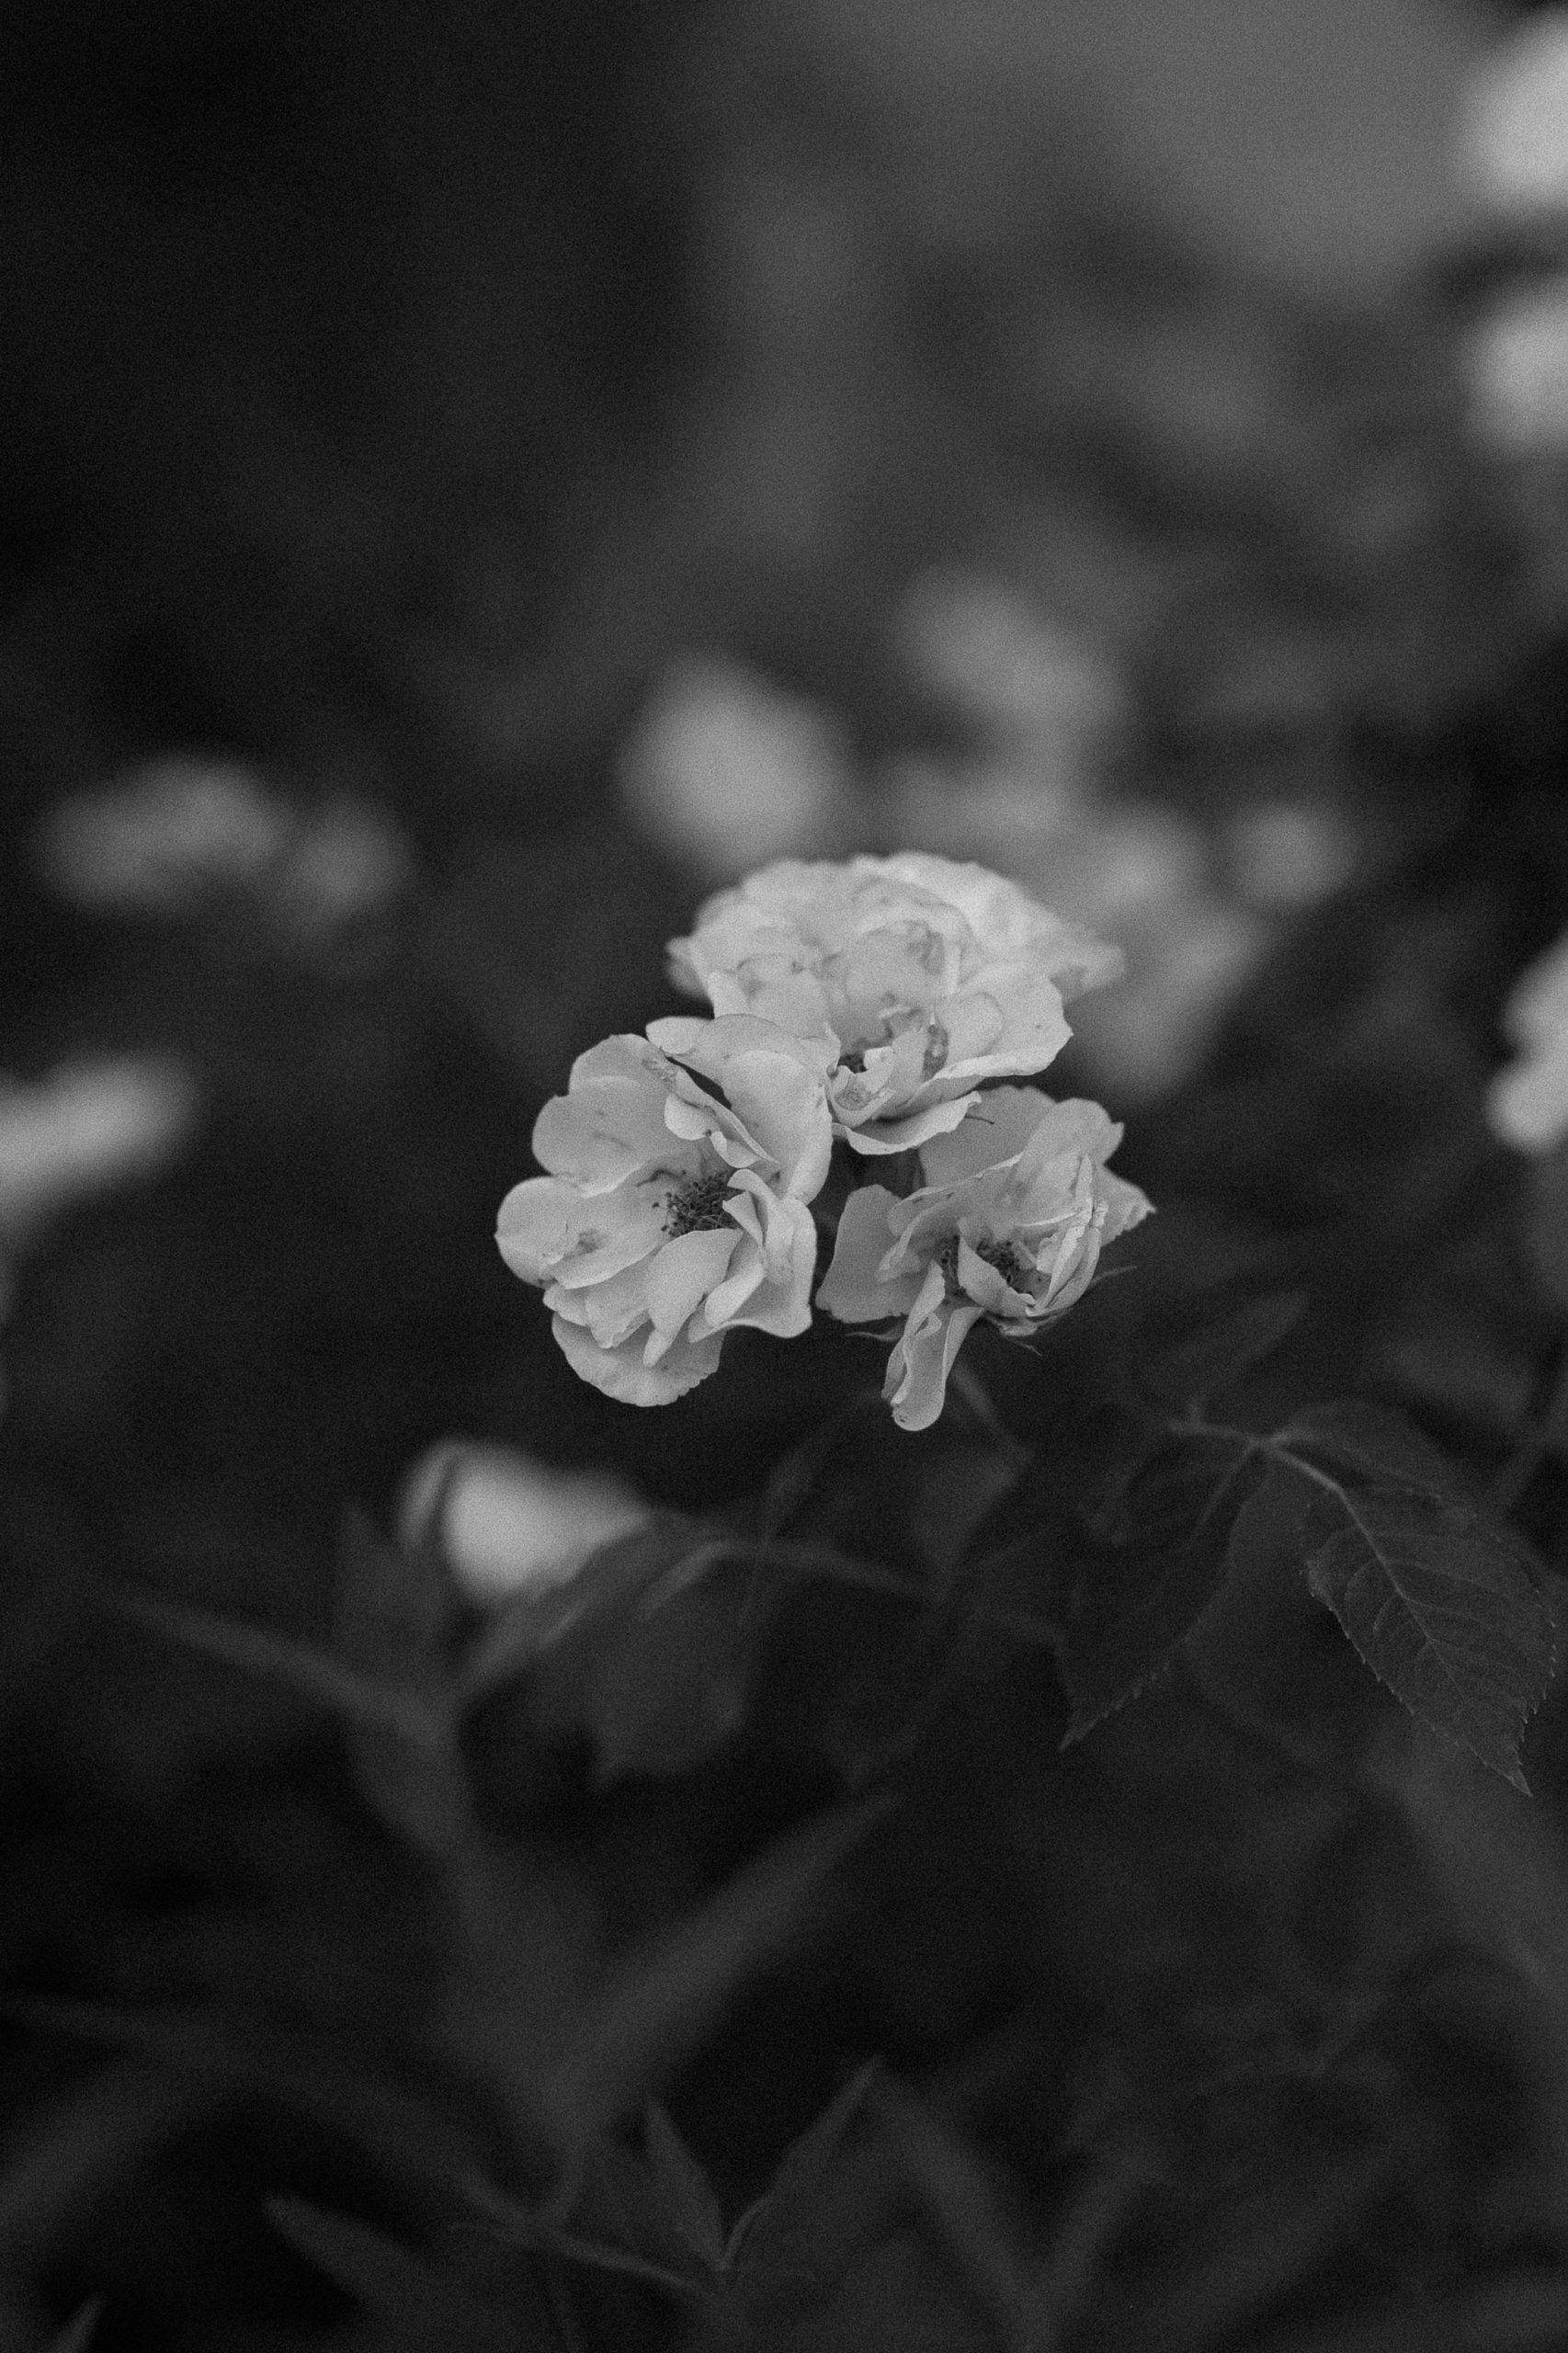 Black and white photos of flowers at Inn of the Turquoise Bear | Santa Fe lesbian elopement | Santa Fe elopement photographer | Santa Fe wedding | LGBTQ elopement | Photo by Denver Elopement Photographer Ashley Joyce Photography, copyright 2021